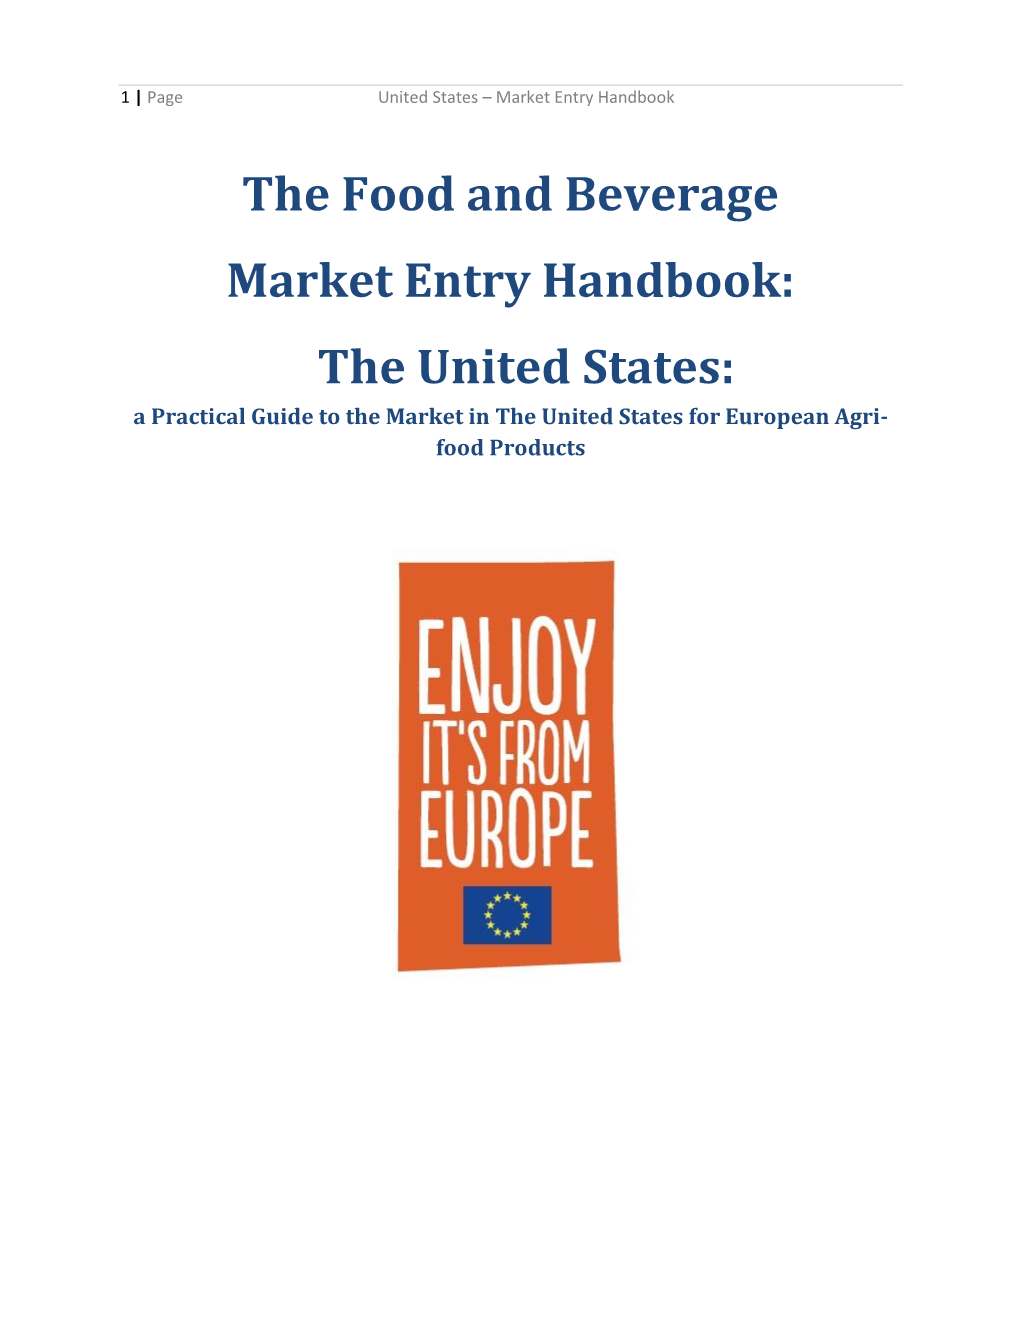 The Food and Beverage Market Entry Handbook: the United States